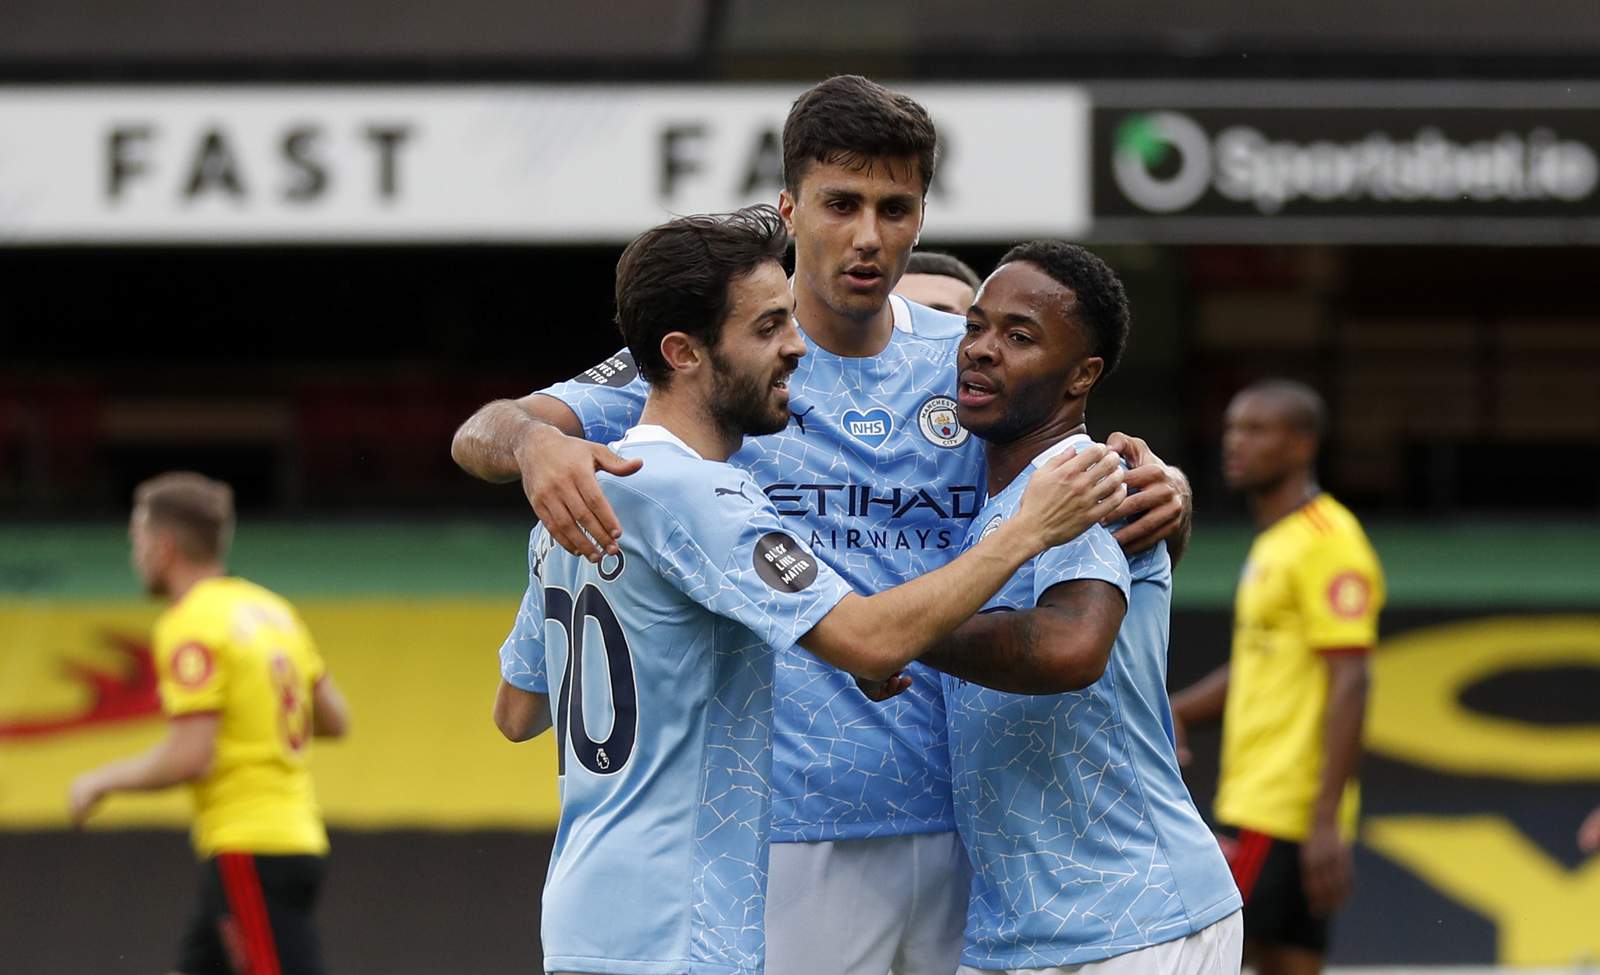 4-0 rout by Man City deepens Watford's relegation concerns